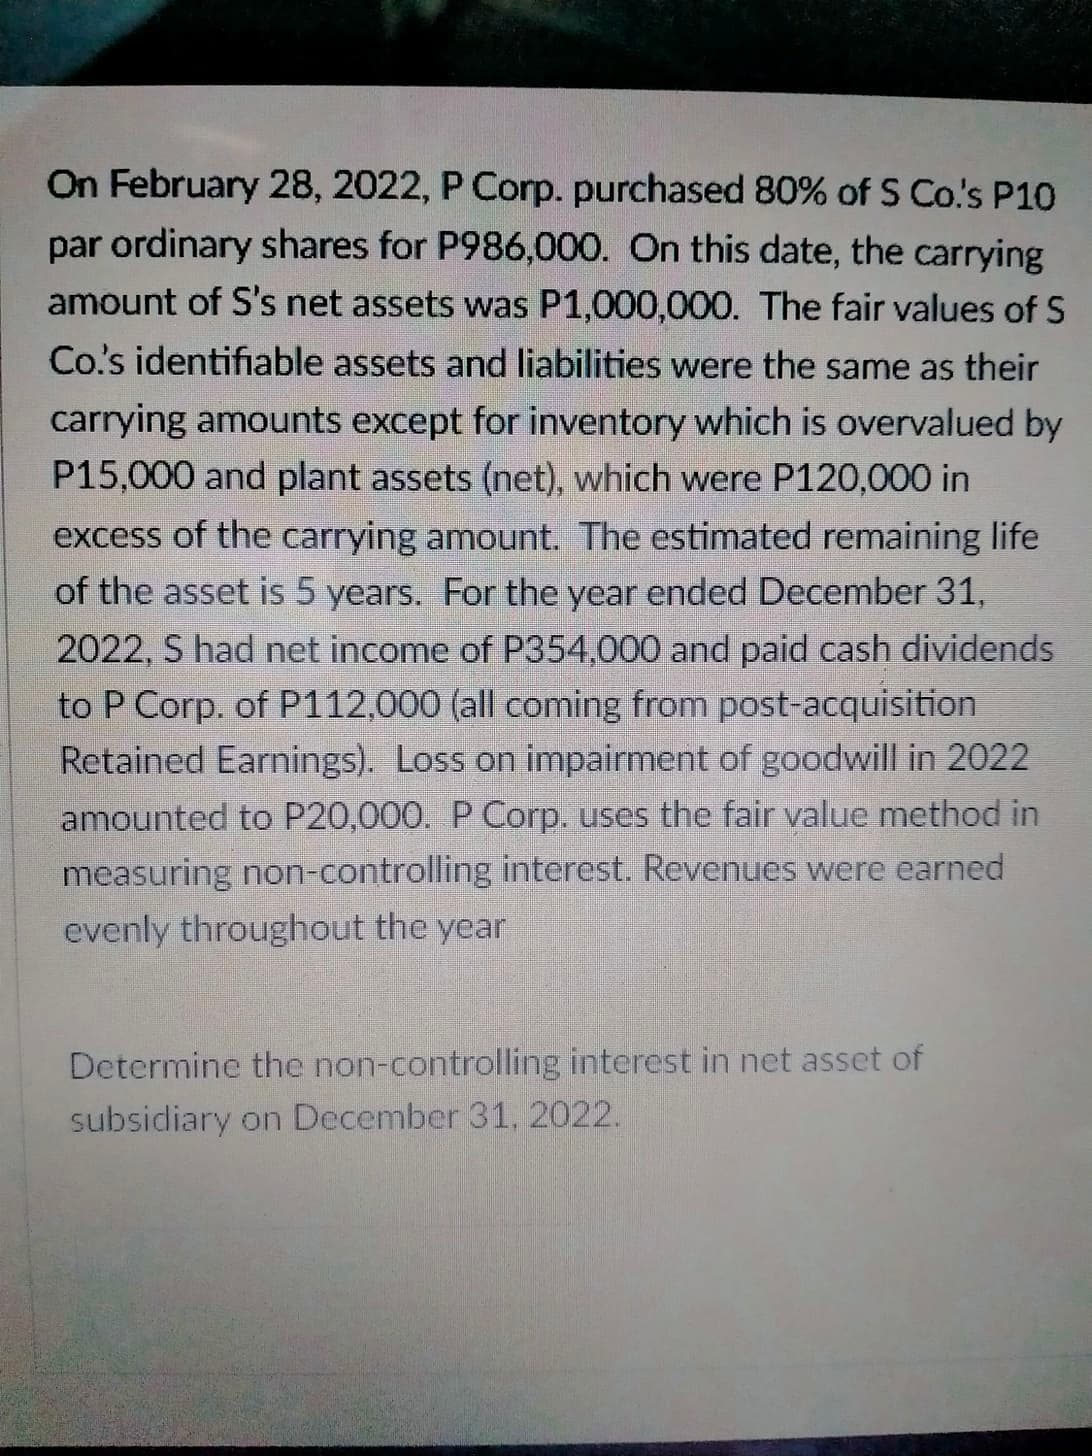 On February 28, 2022, P Corp. purchased 80% of S Co's P10
par ordinary shares for P986,000. On this date, the carrying
amount of S's net assets was P1,000,000. The fair values of S
Co's identifiable assets and liabilities were the same as their
carrying amounts except for inventory which is overvalued by
P15,000 and plant assets (net), which were P120,000 in
excess of the carrying amount. The estimated remaining life
of the asset is 5 years. For the year ended December 31,
2022, S had net income of P354,000 and paid cash dividends
to P Corp. of P112,000 (all coming from post-acquisition
Retained Earnings). Loss on impairment of goodwill in 2022
amounted to P20,000.
Corp. uses the fair value method in
measuring non-controlling interest. Revenues were earned
evenly throughout the year
Determine the non-controlling interest in net asset of
subsidiary on December 31, 2022.
